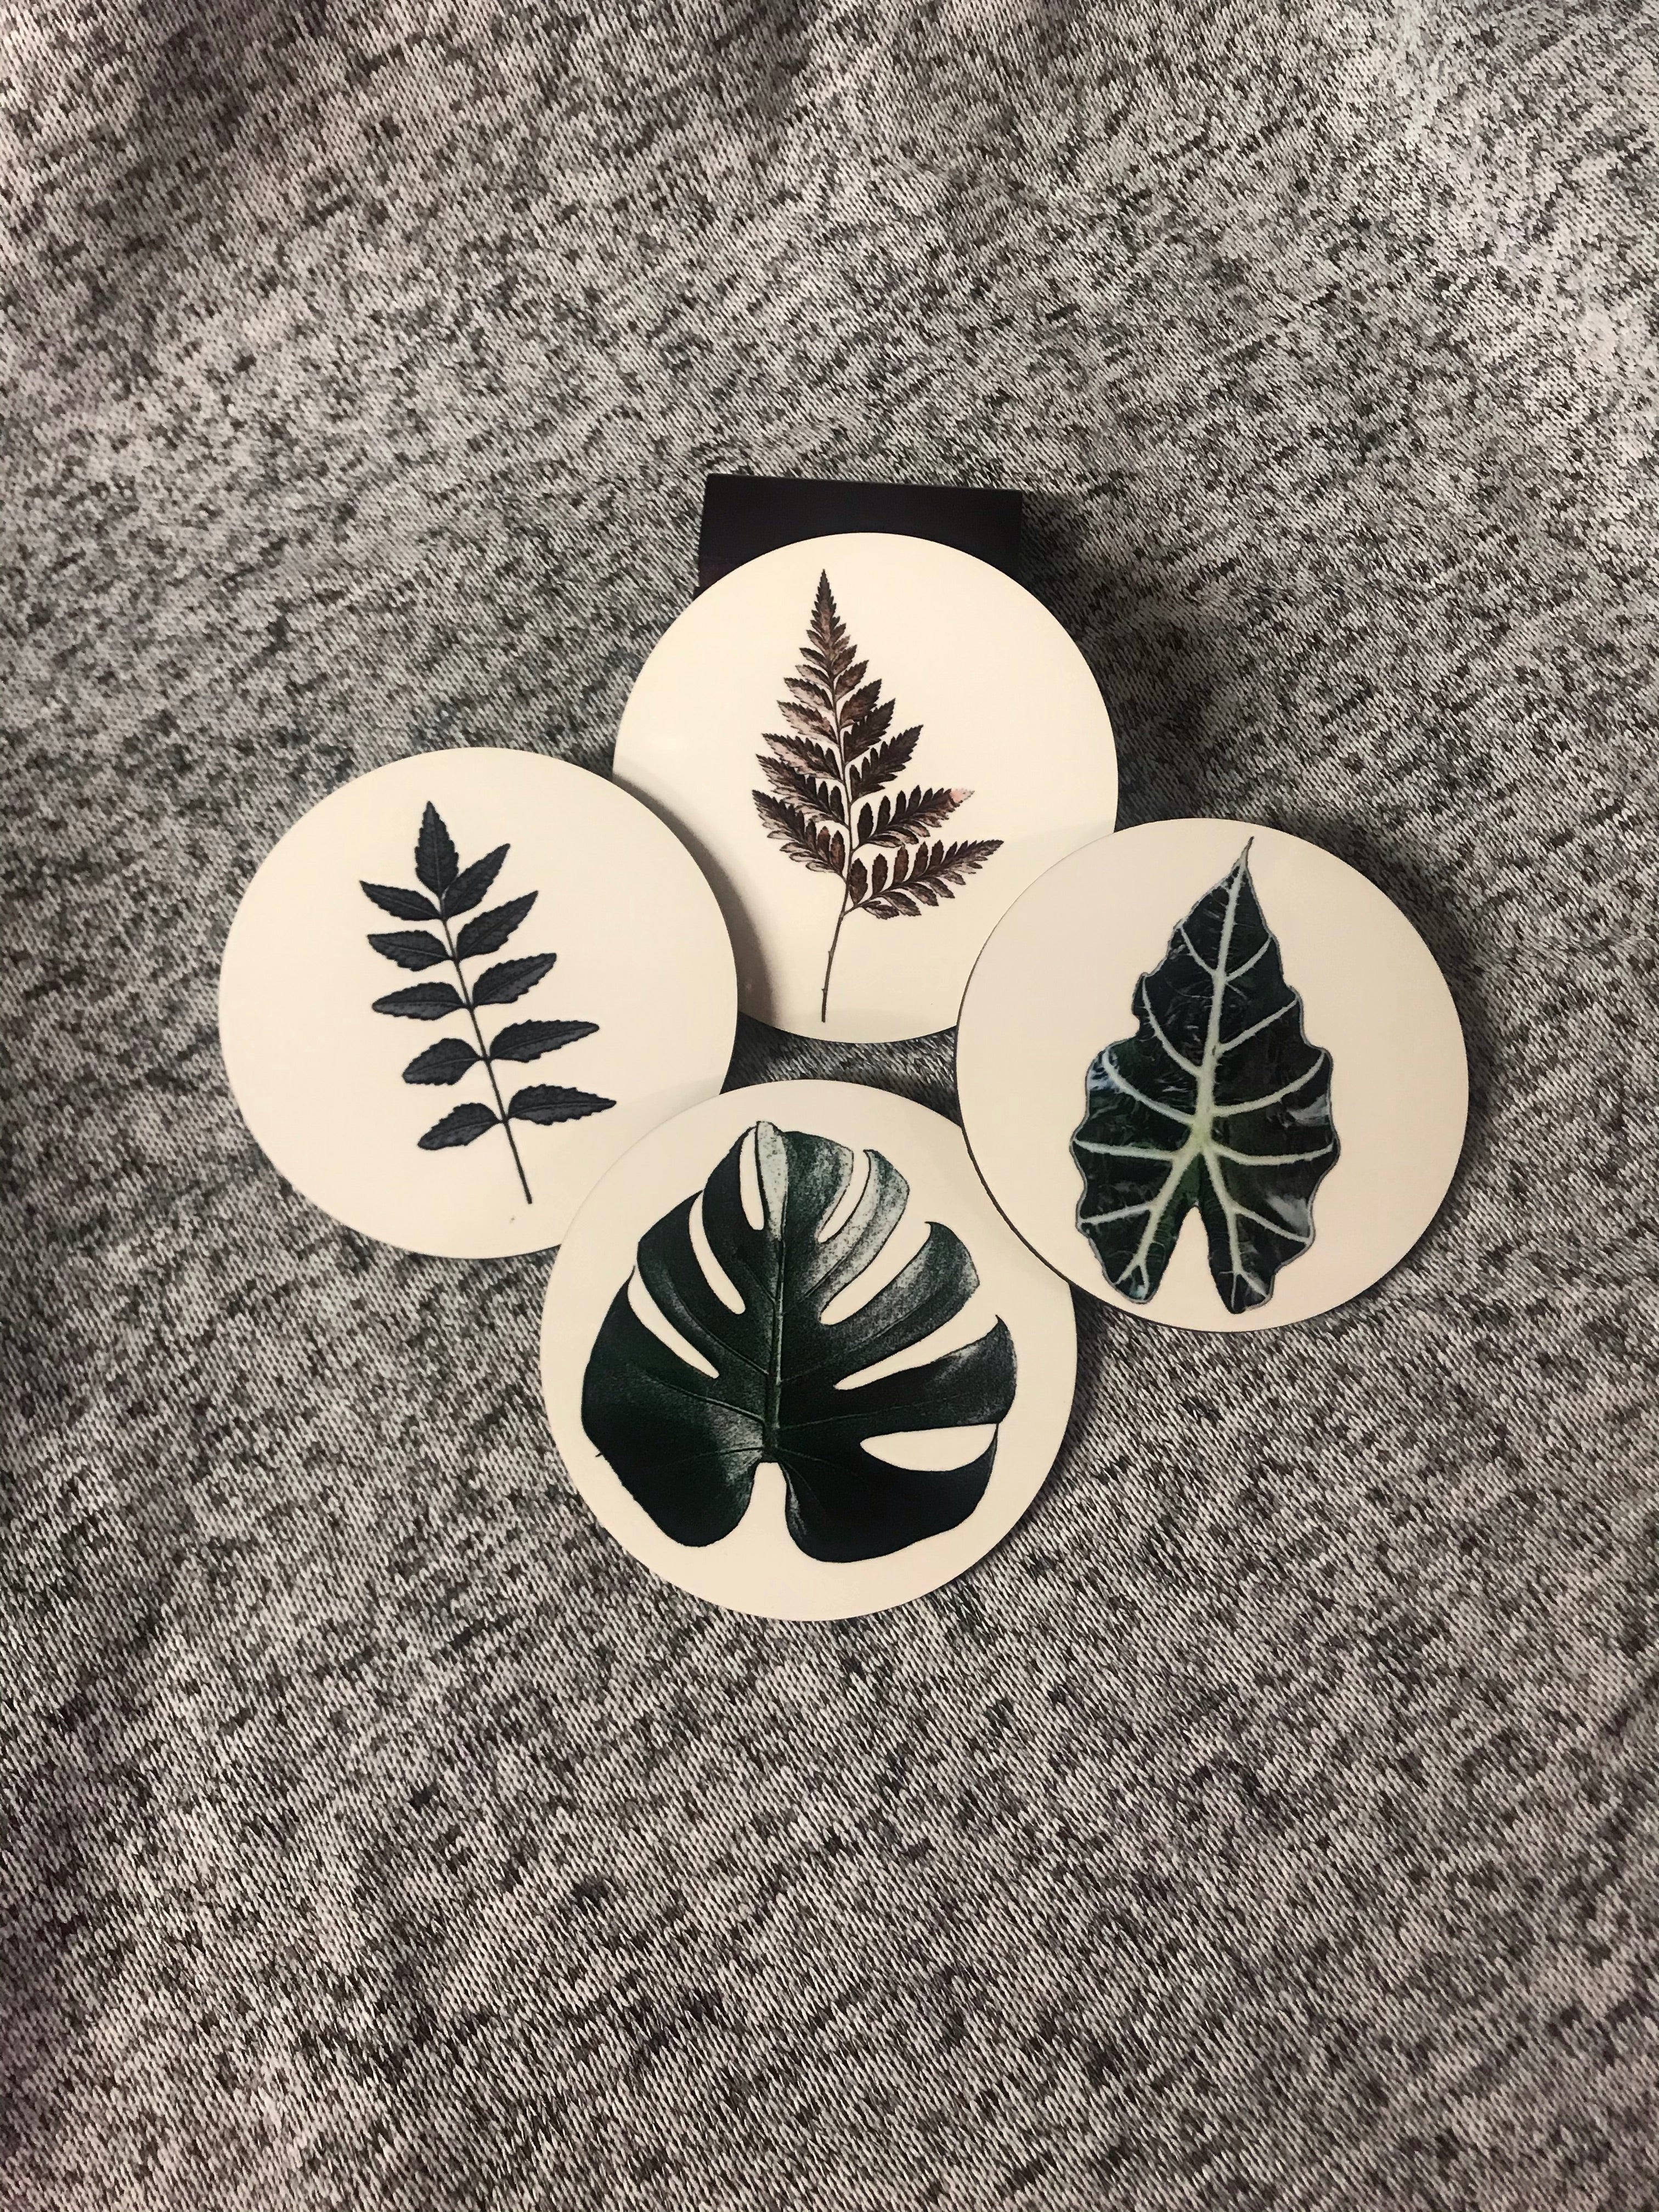 Plant Coasters Round with Cork Bottom (Set of 4)